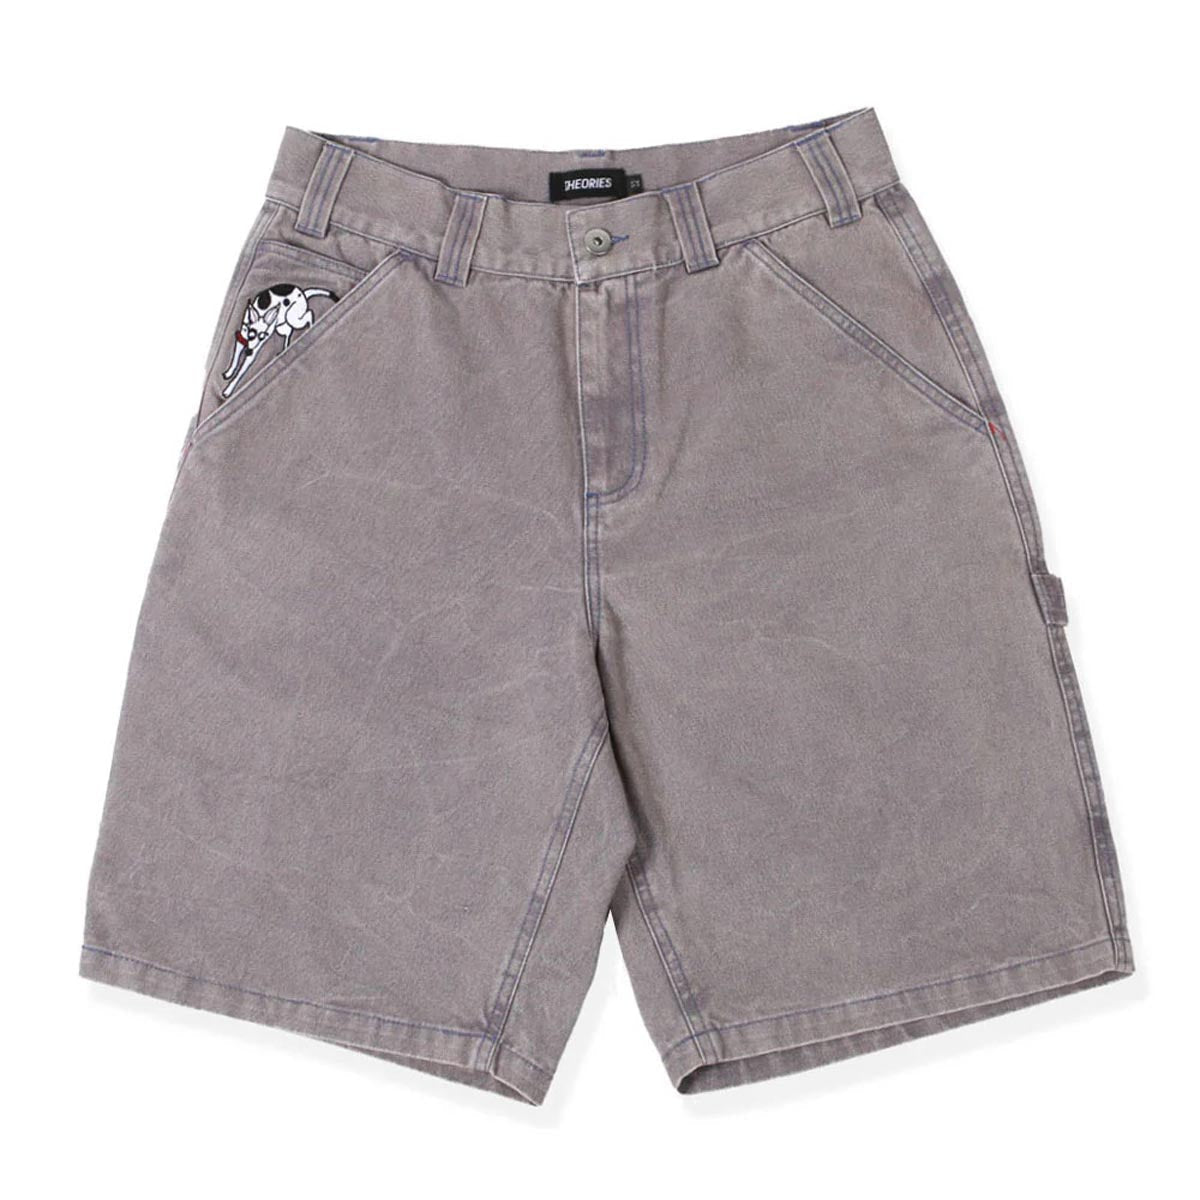 Theories Piano Trap Carpenter Shorts - Washed Purple image 1